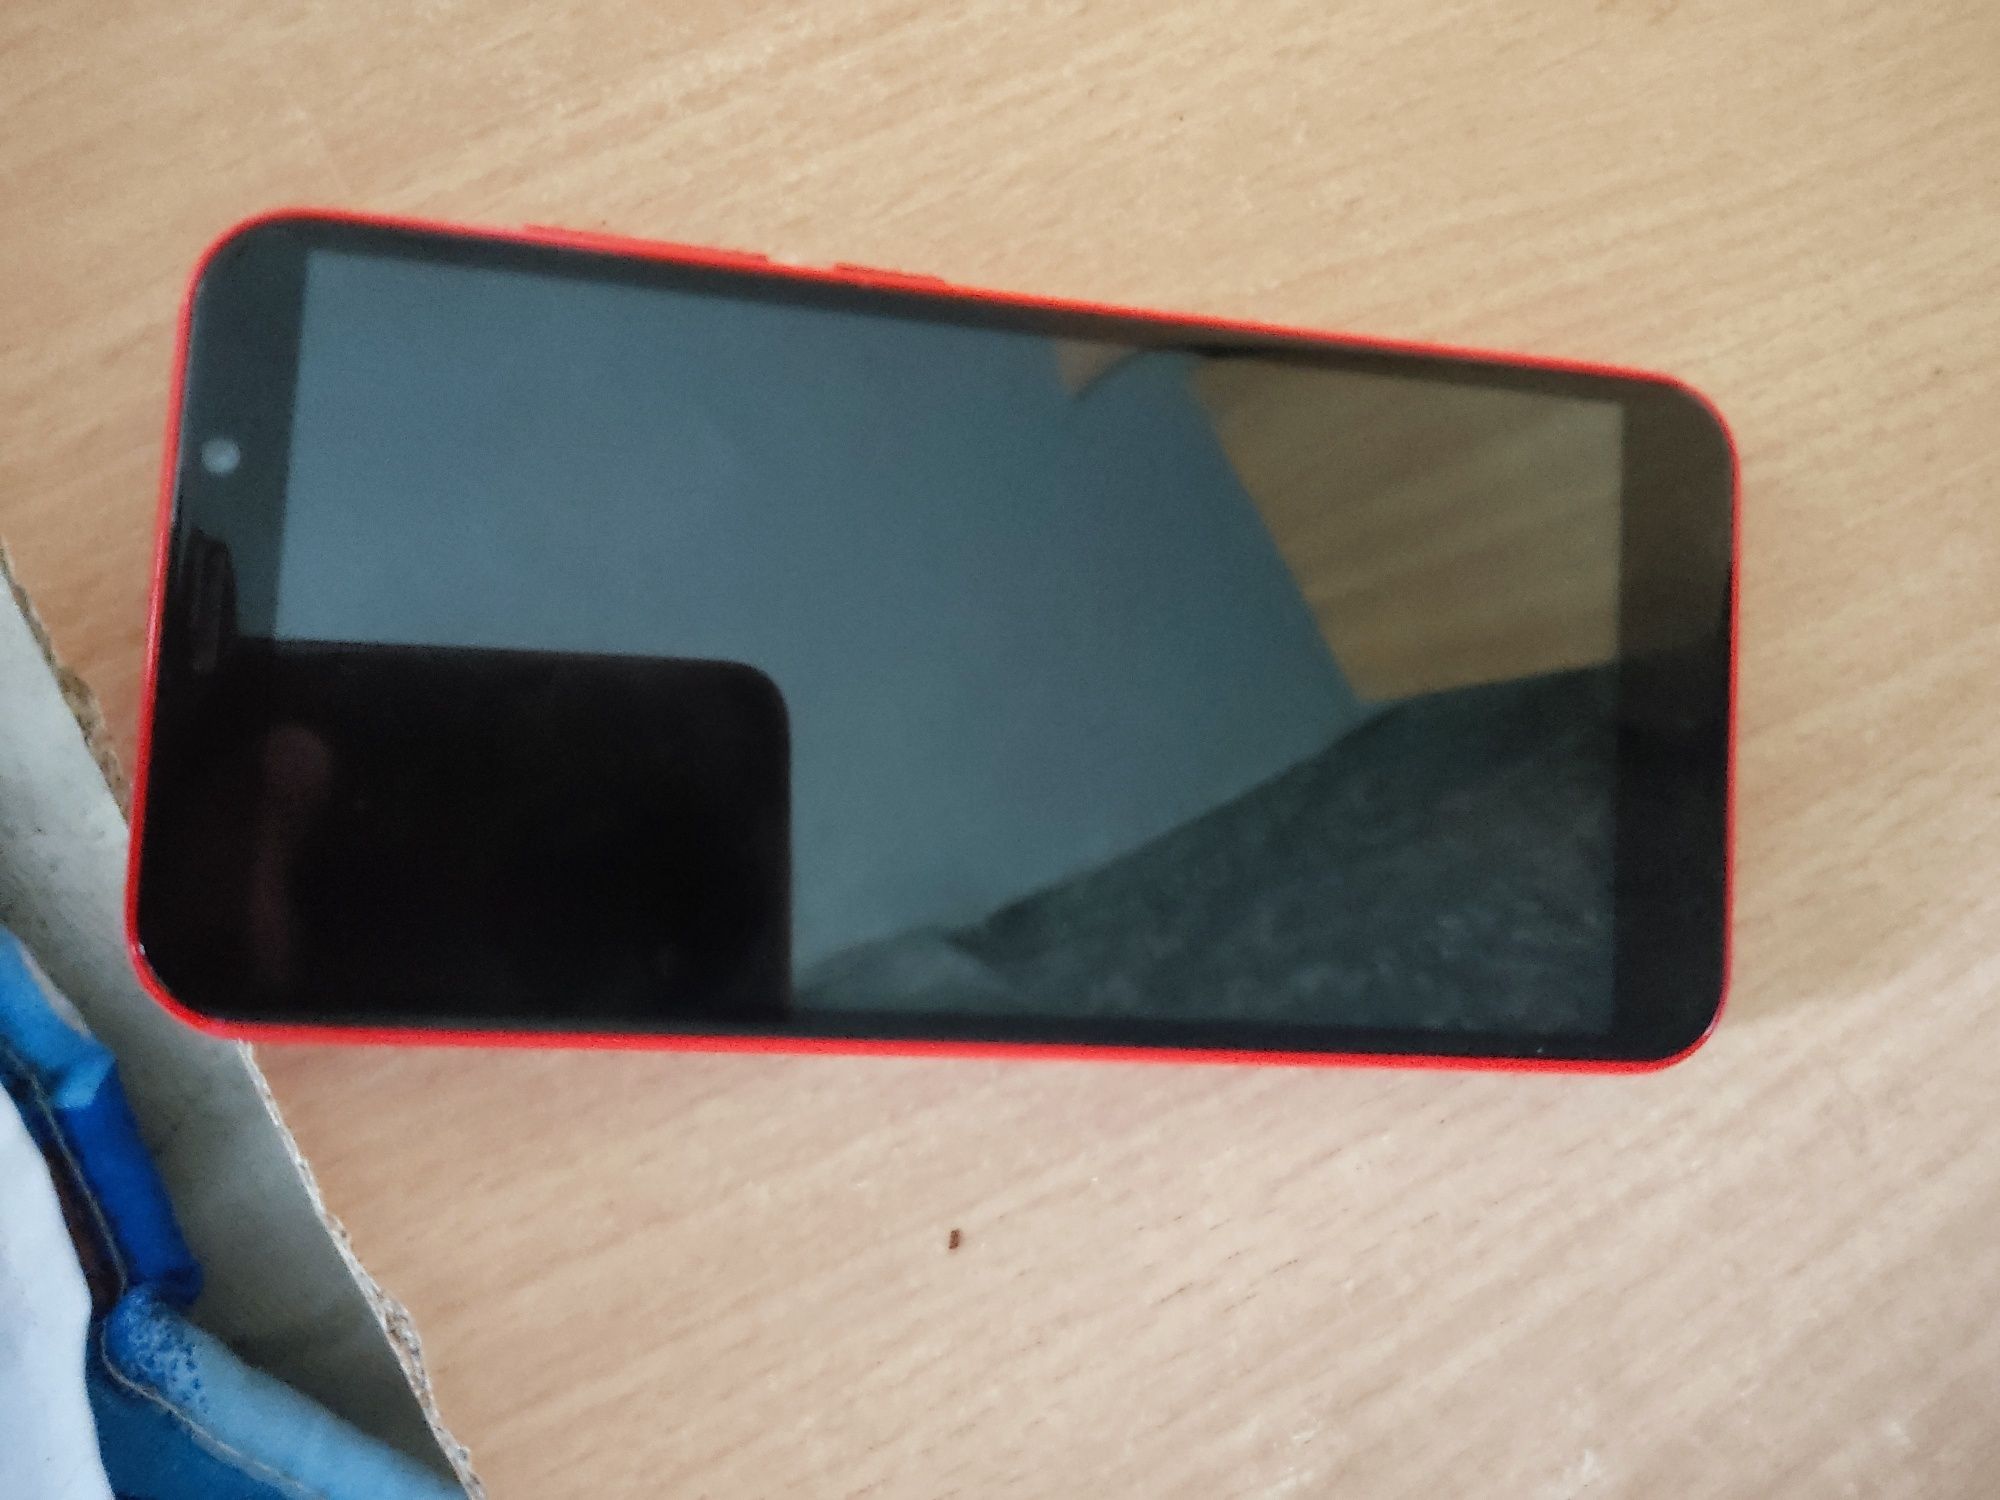 MultiPhone 3471 Wize Q3 DUO Red